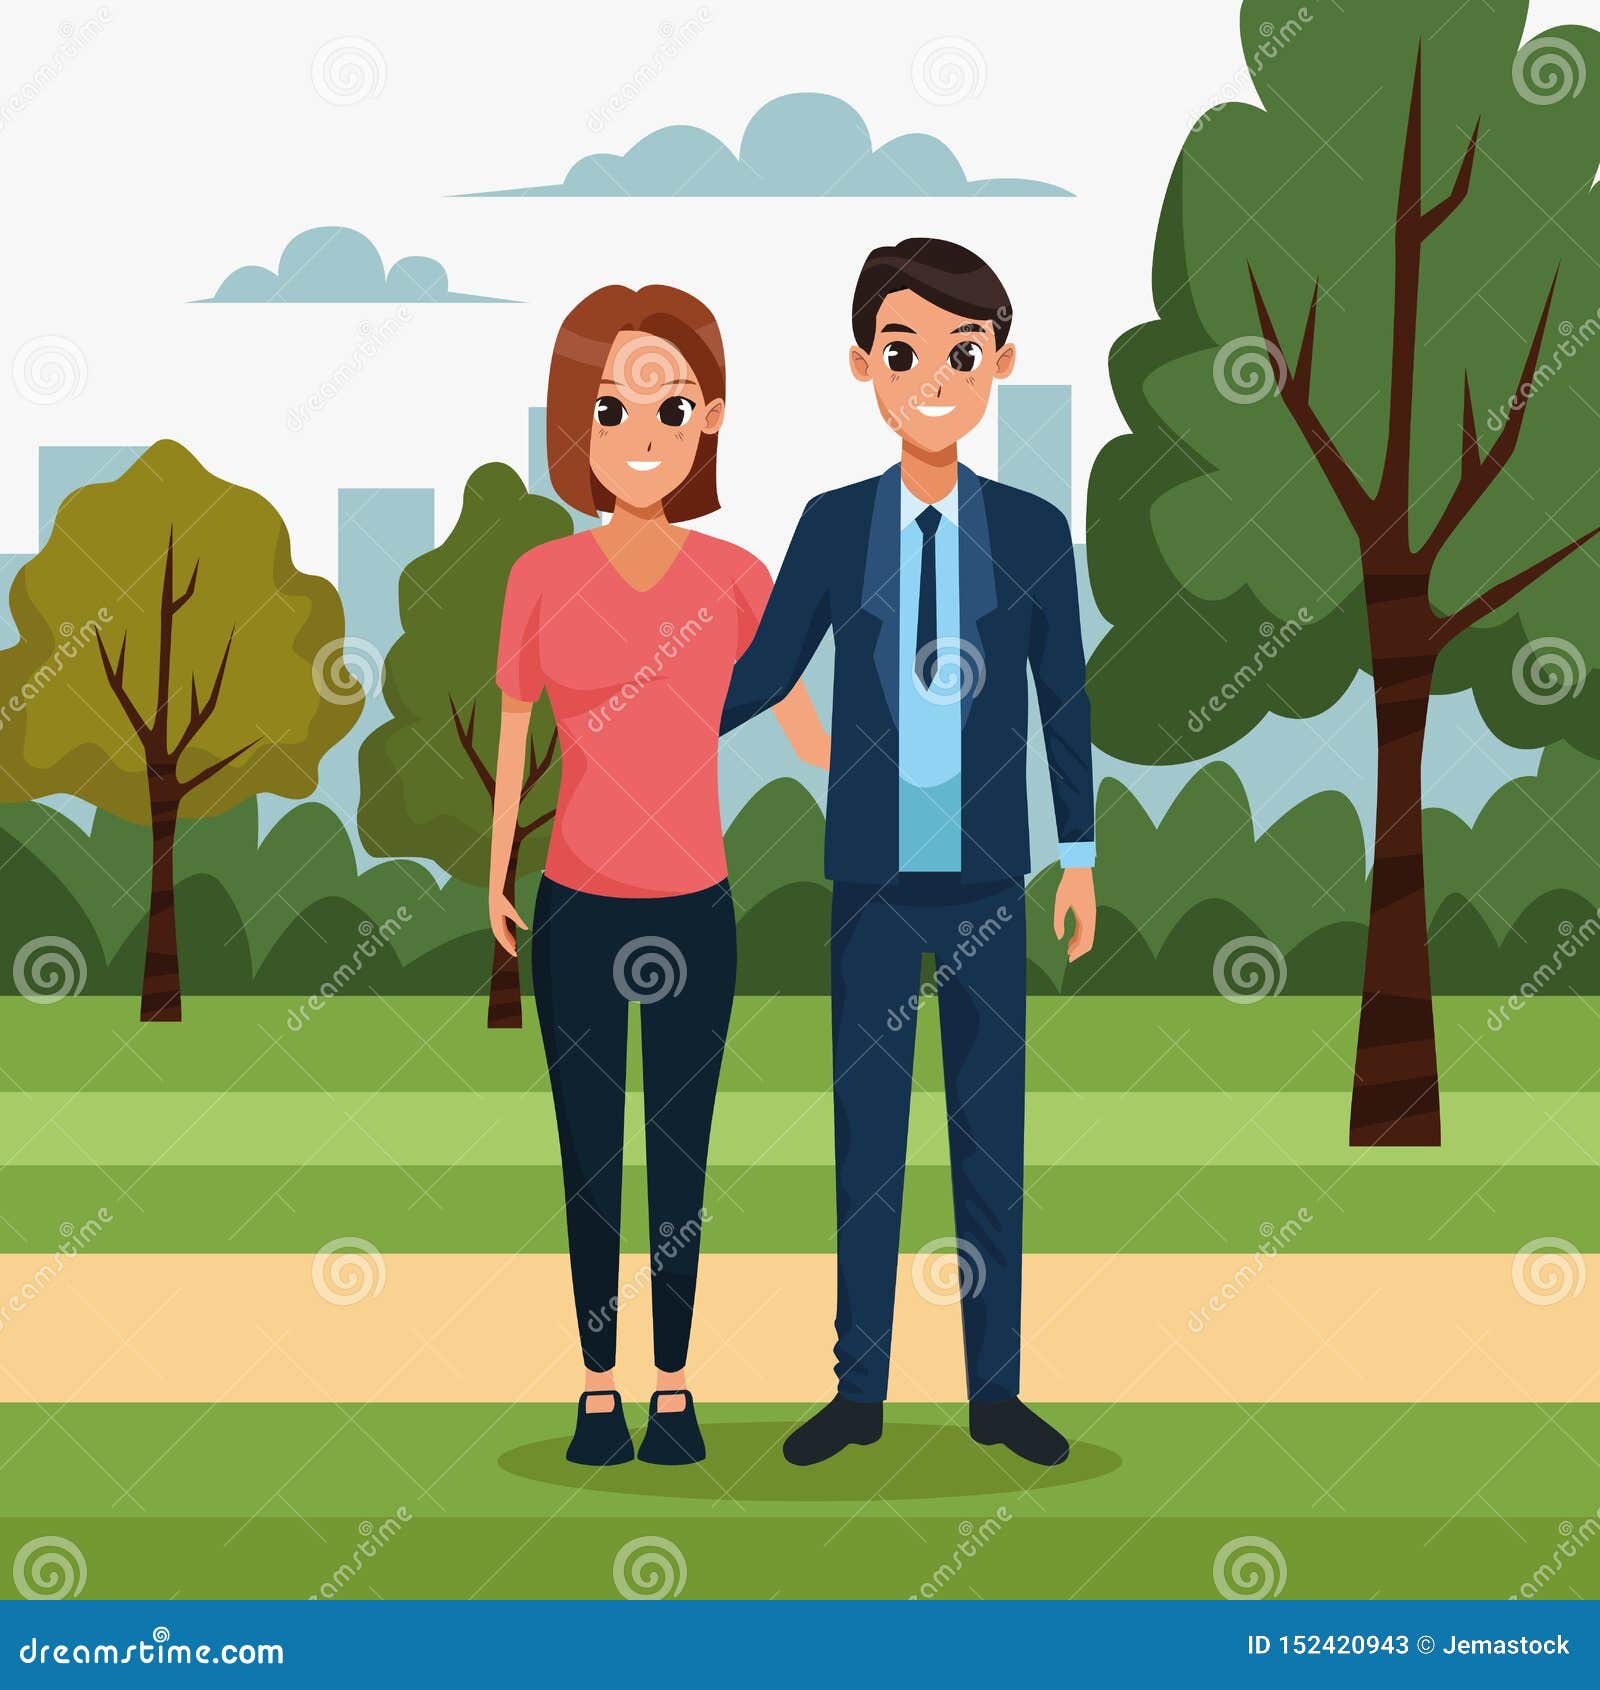 Young Couple in the Park Scenery Stock Vector - Illustration of ...